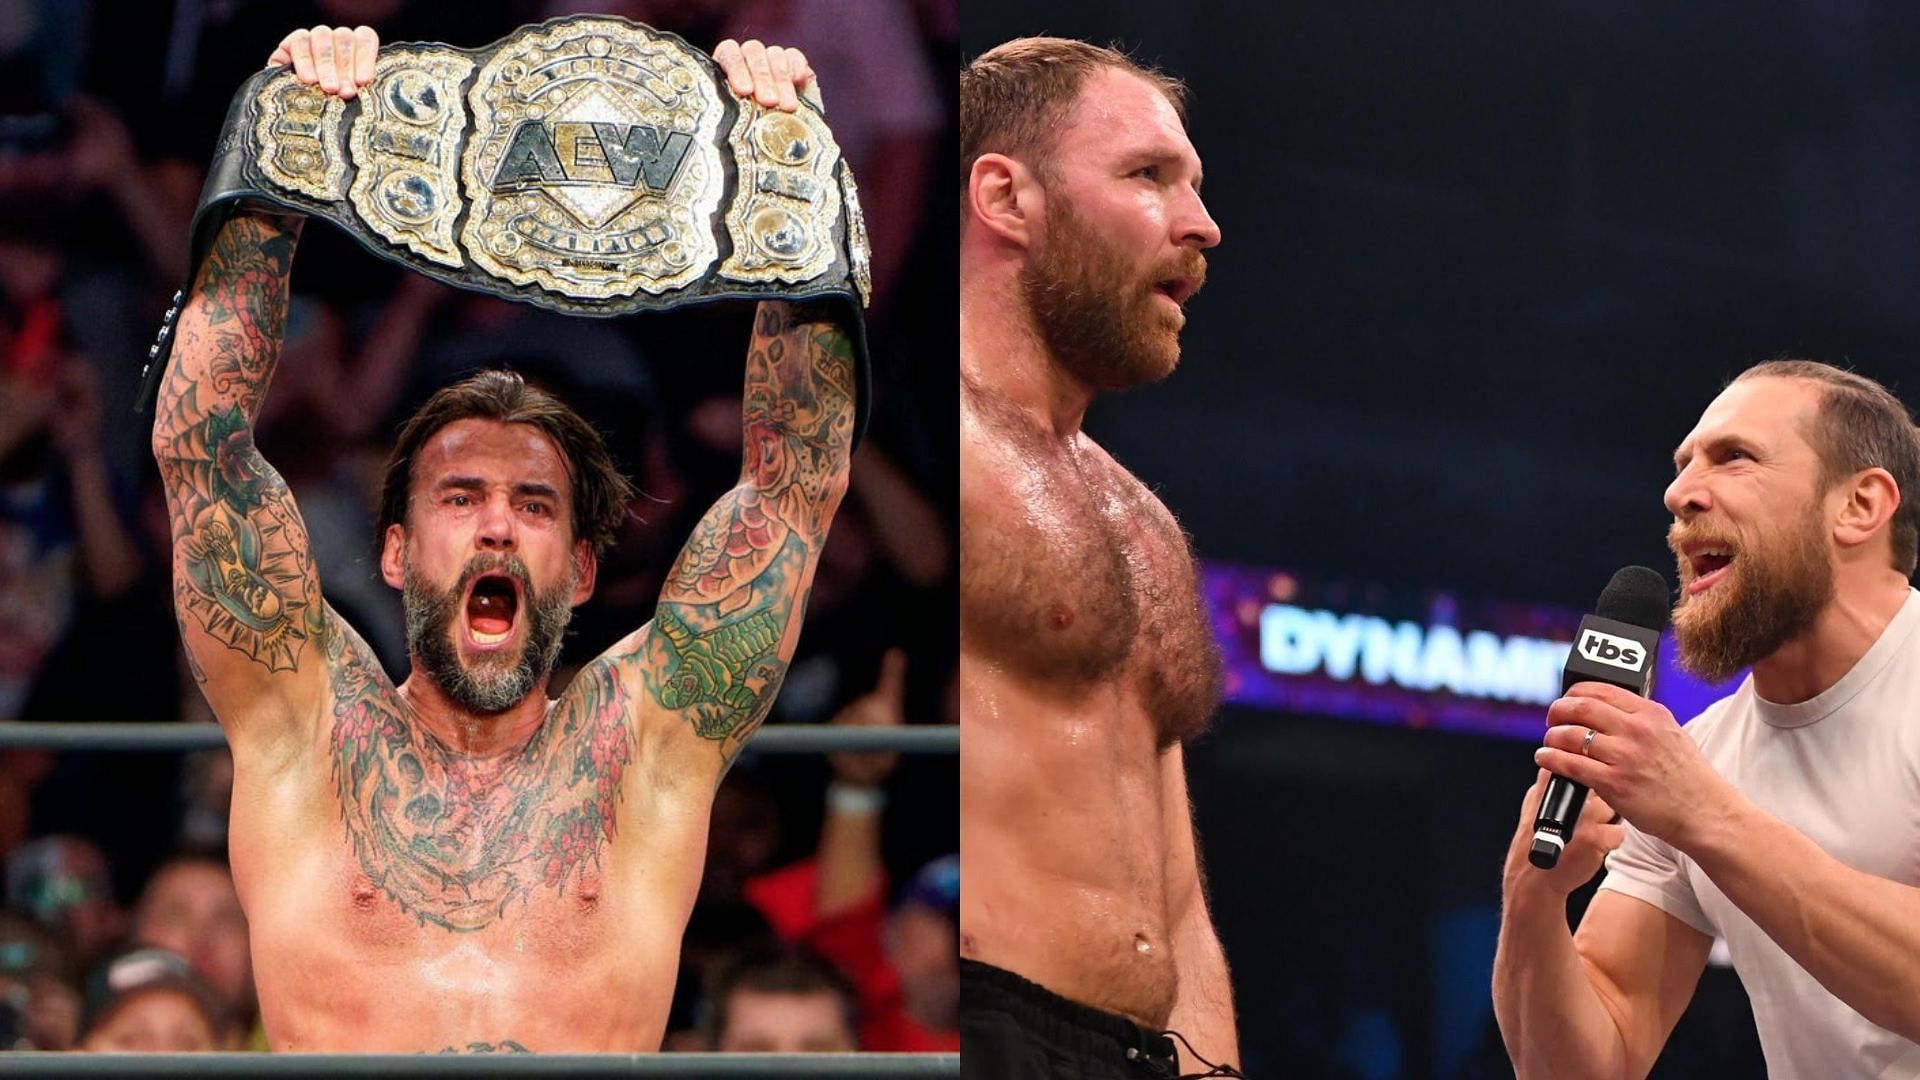 Jon Moxley, CM Punk, and Bryan Danielson are no strangers to one another